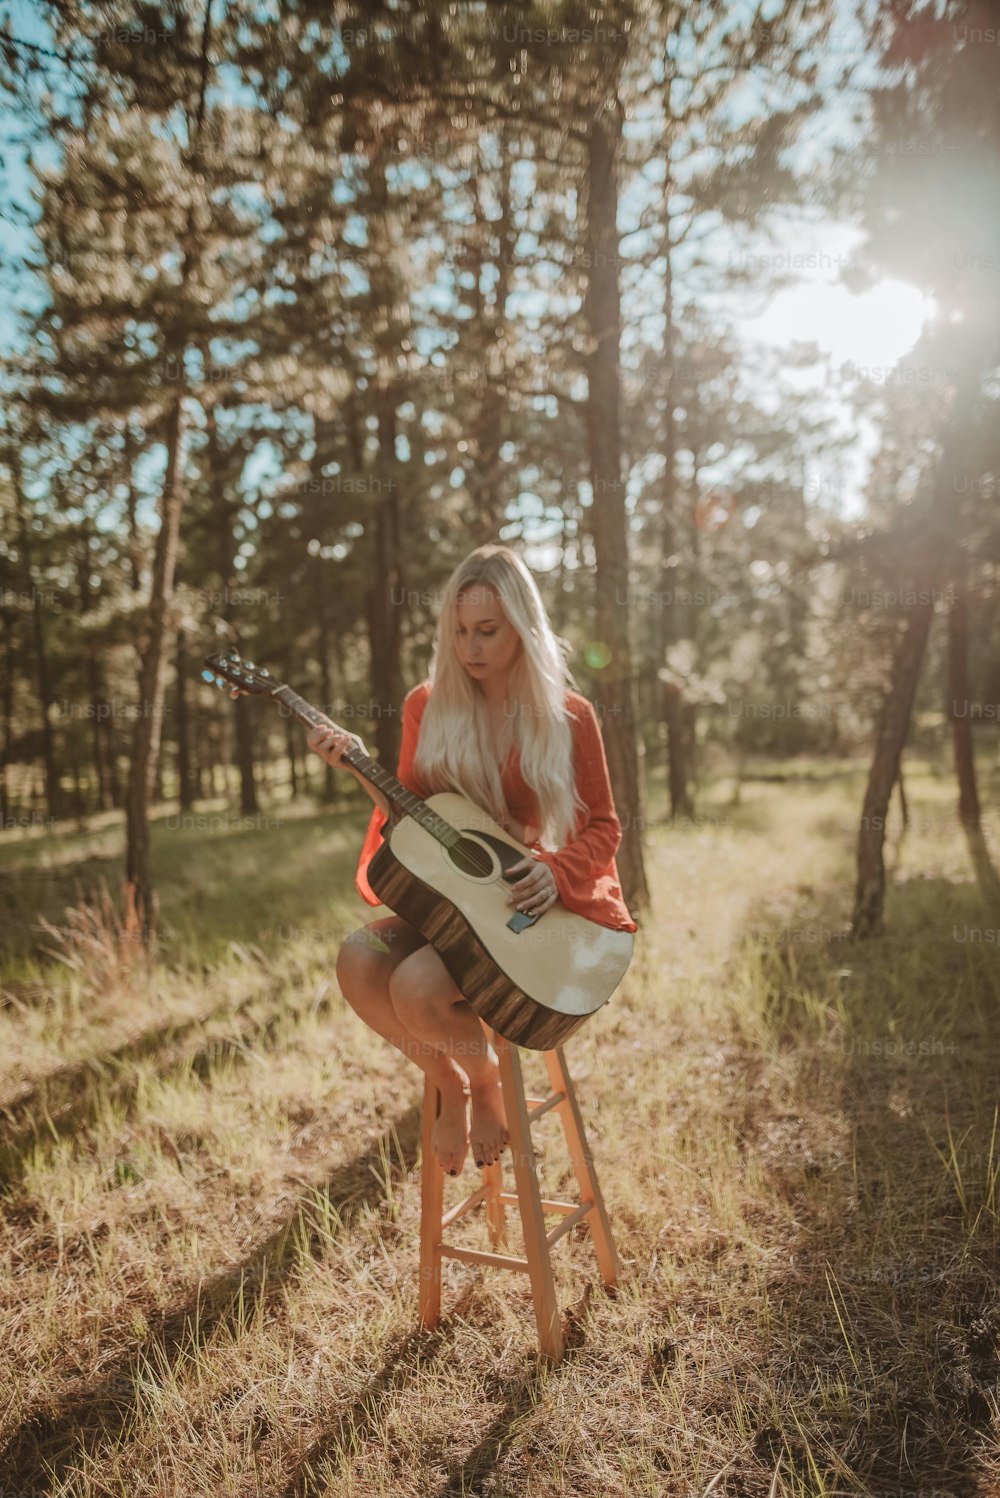 a woman sitting on a stool playing a guitar